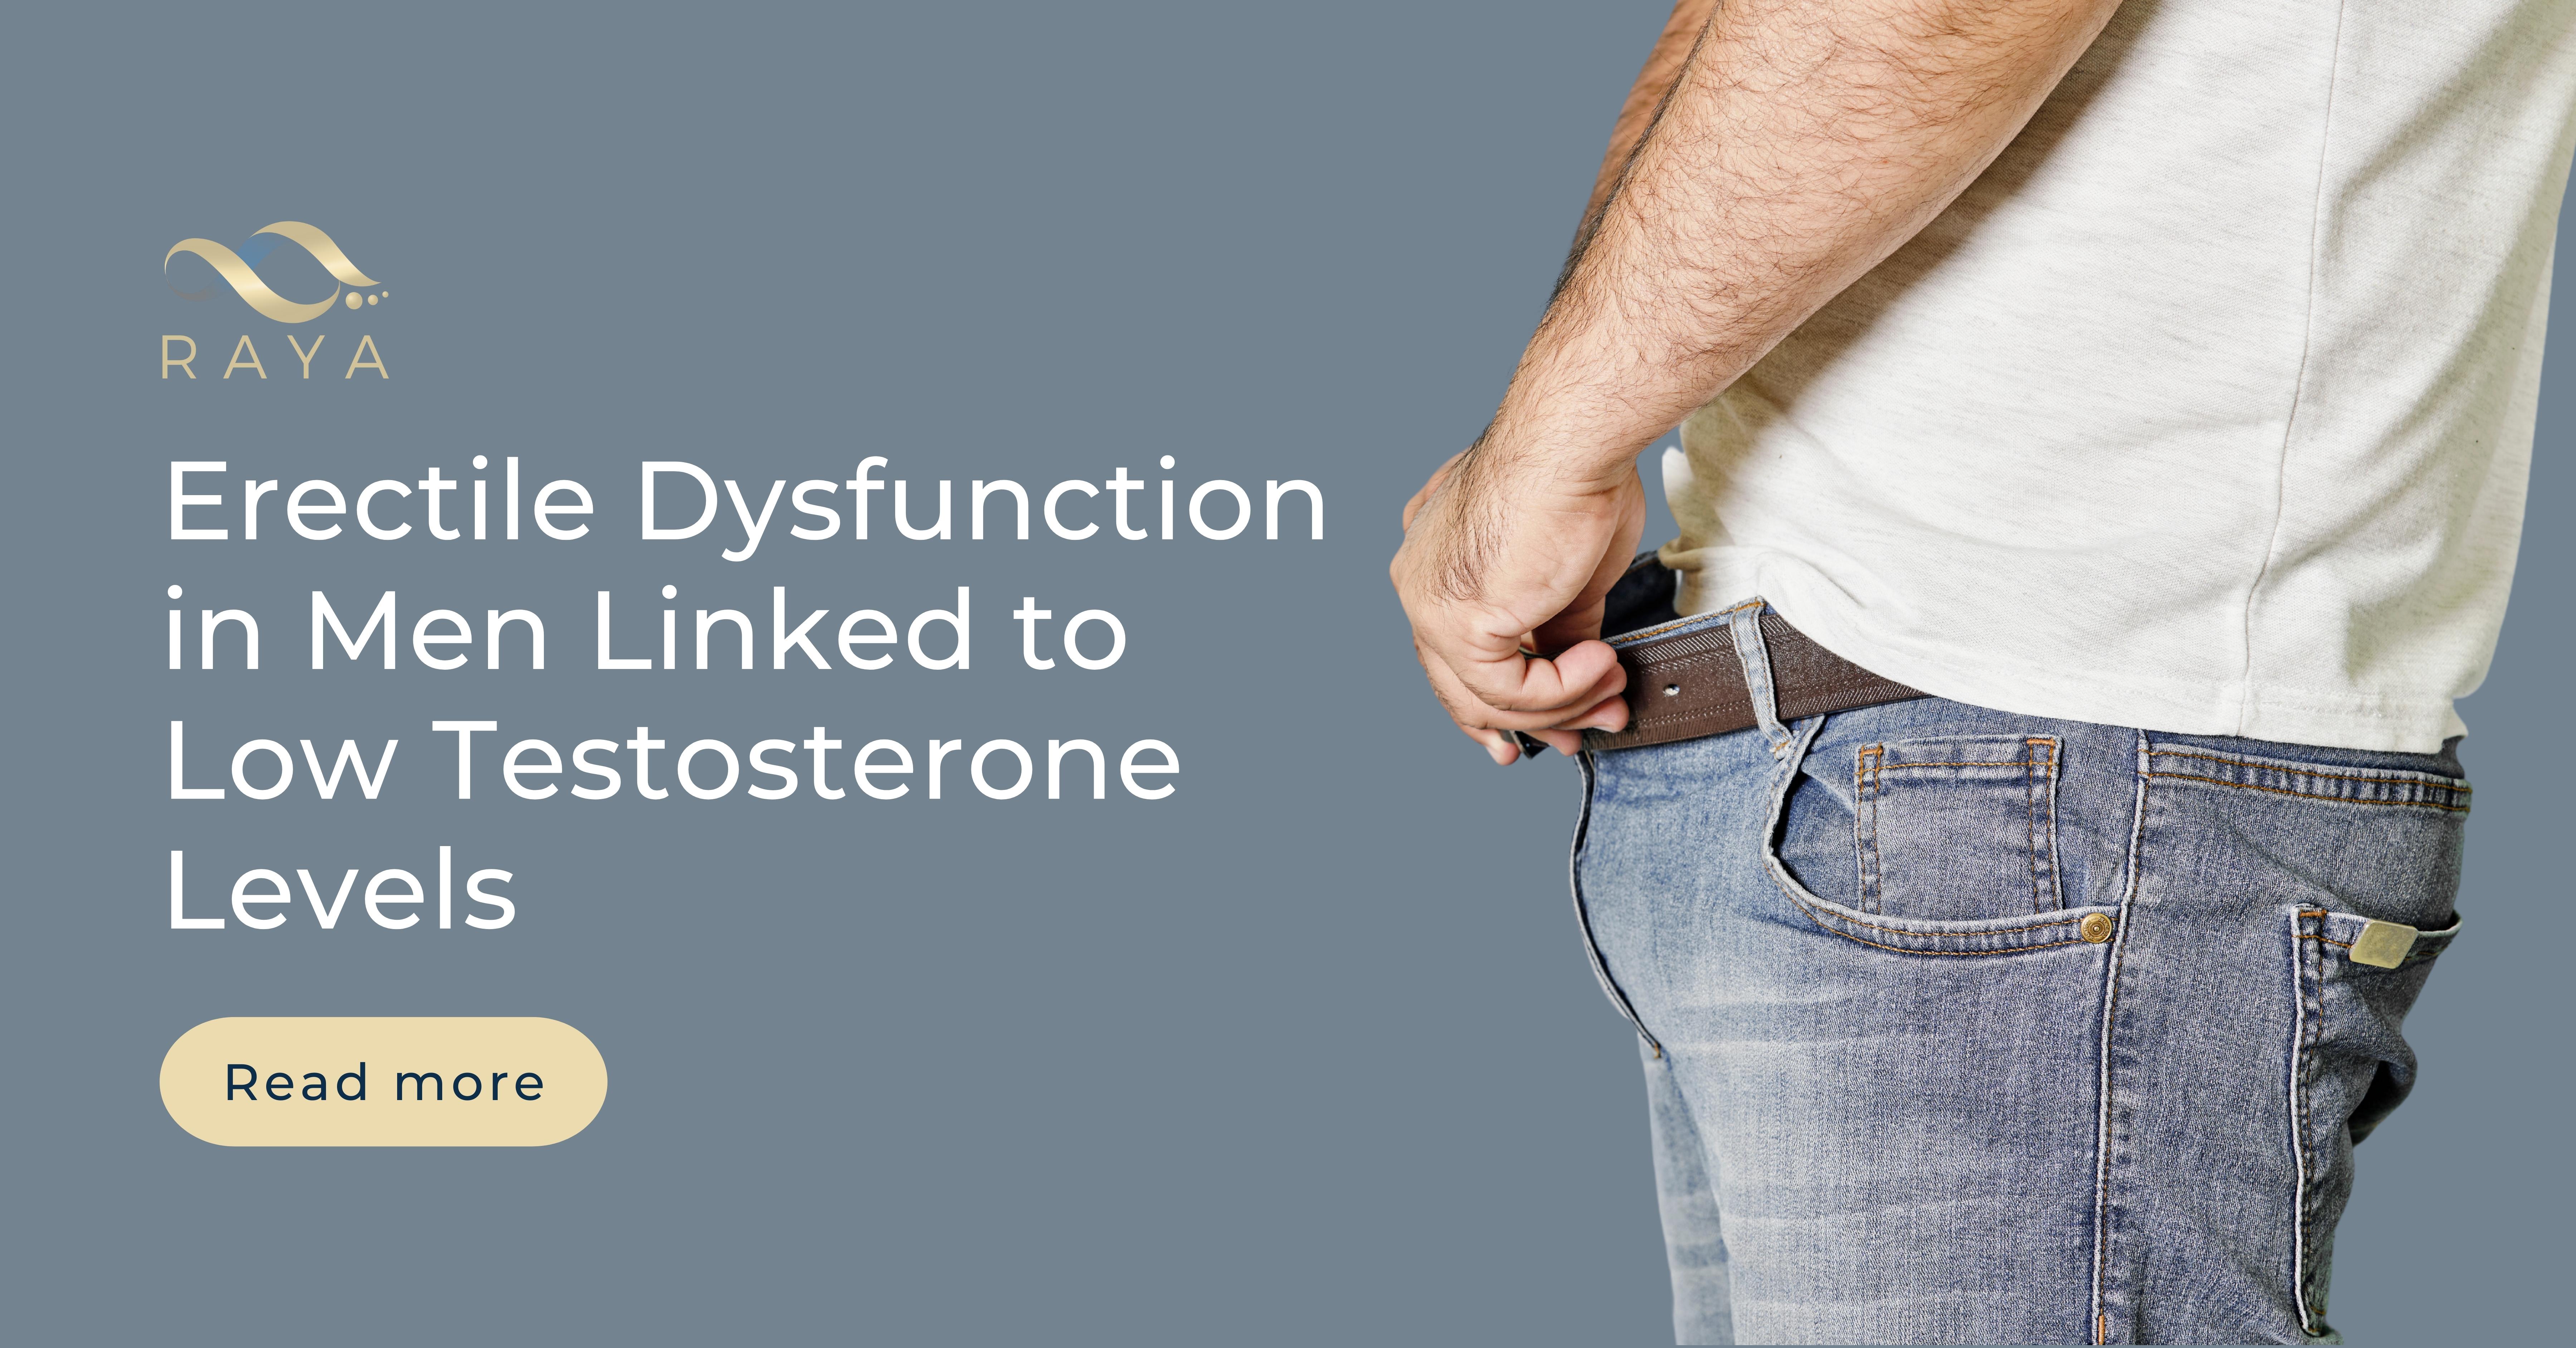 Are You Suffering From Low Testosterone?